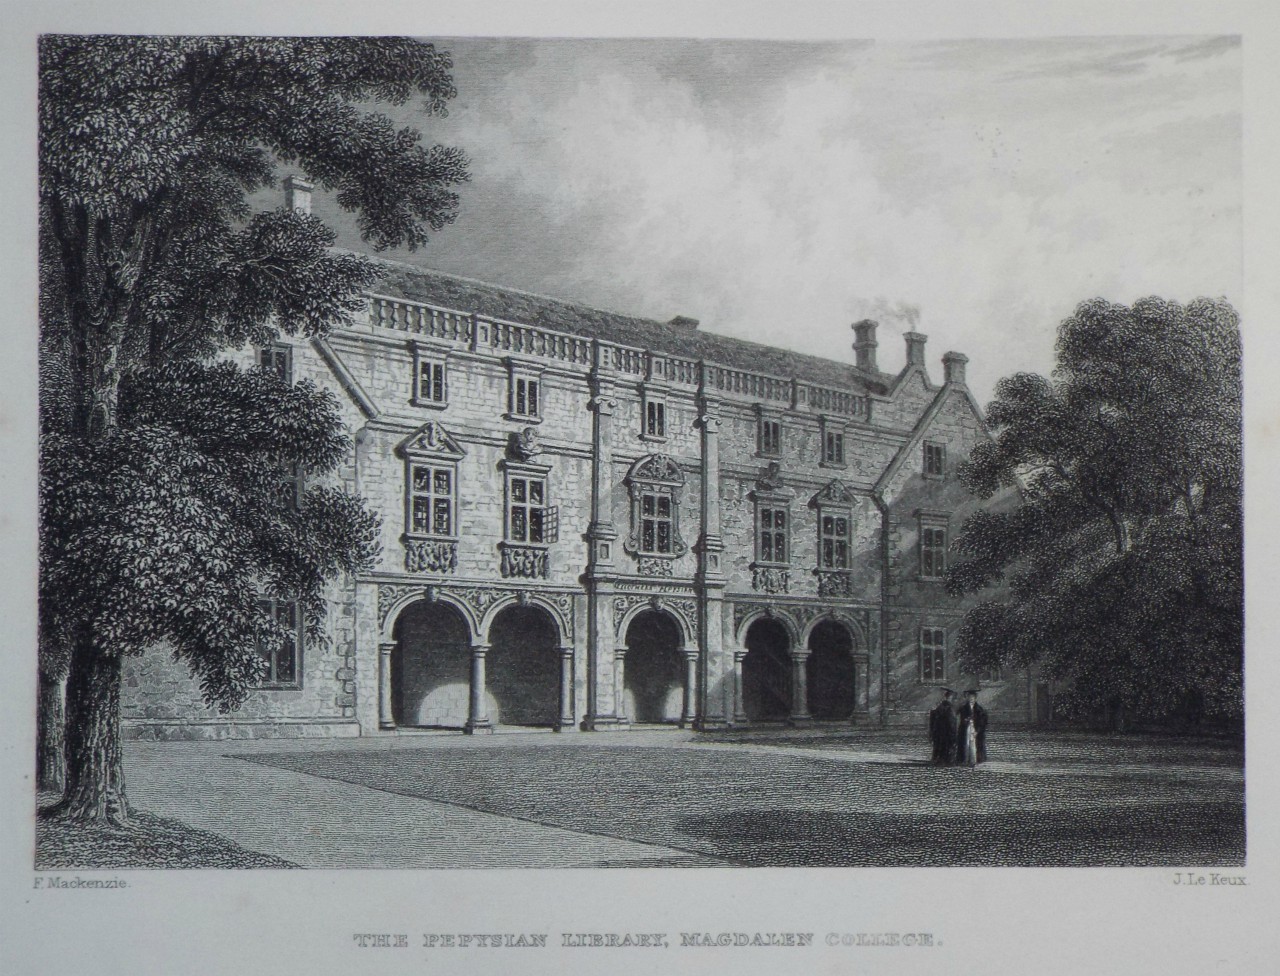 Print - The Pepsyan Library, Magdalen College. - Le